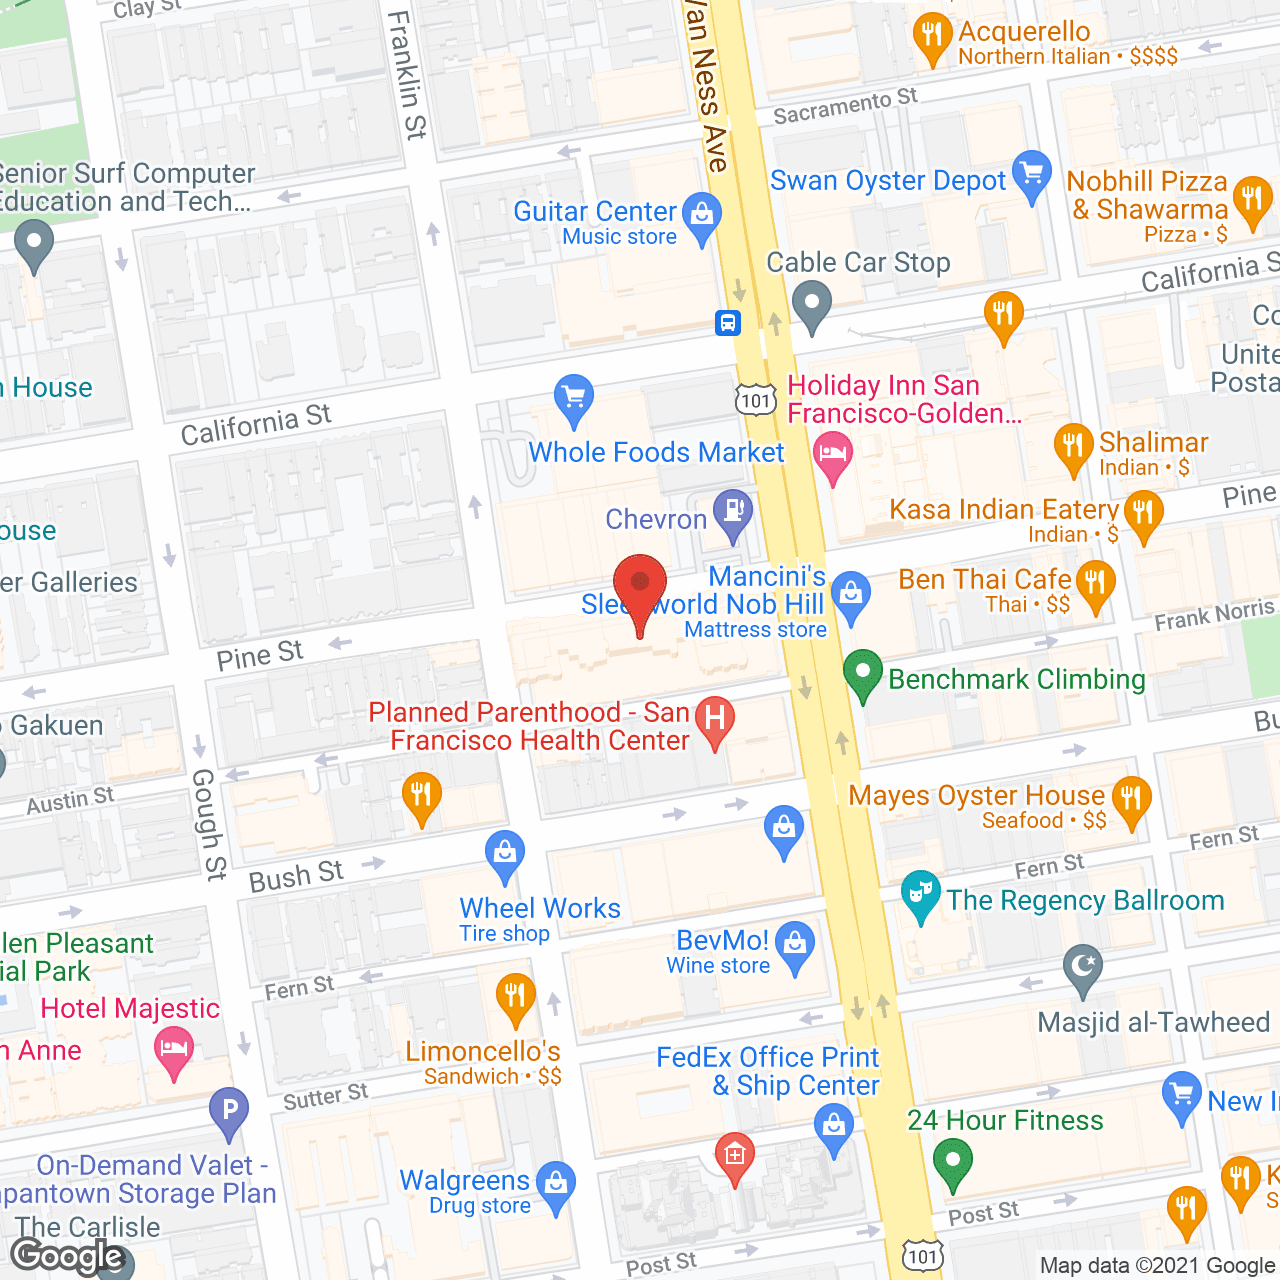 San Francisco Towers in google map